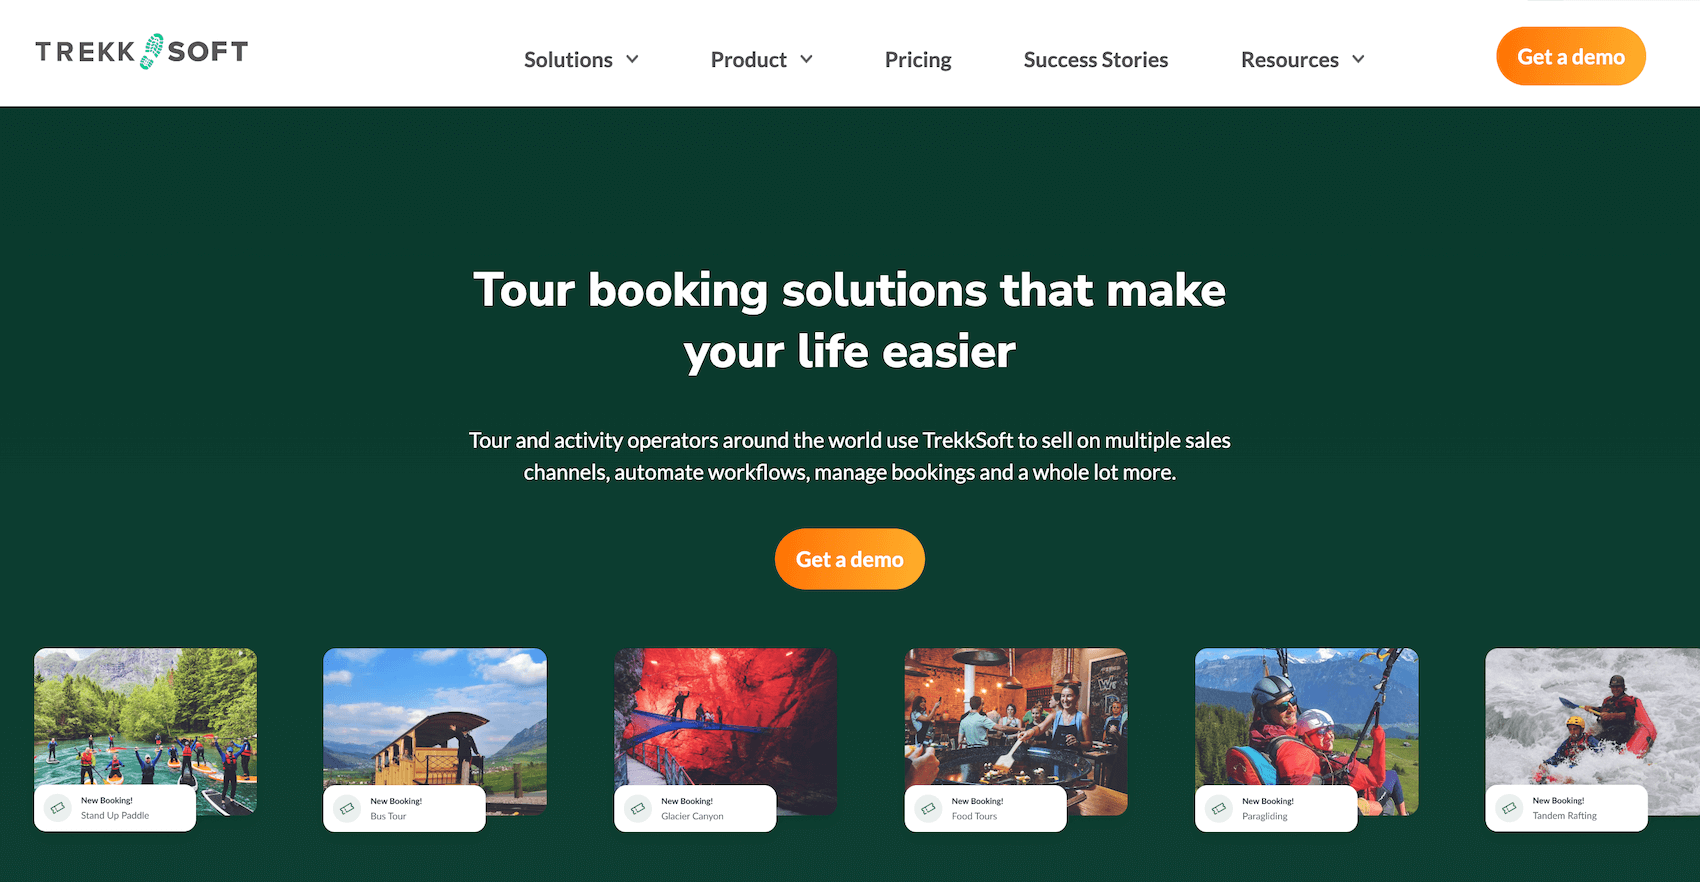 Trekksoft homepage: Tour booking solutions that make your life easier